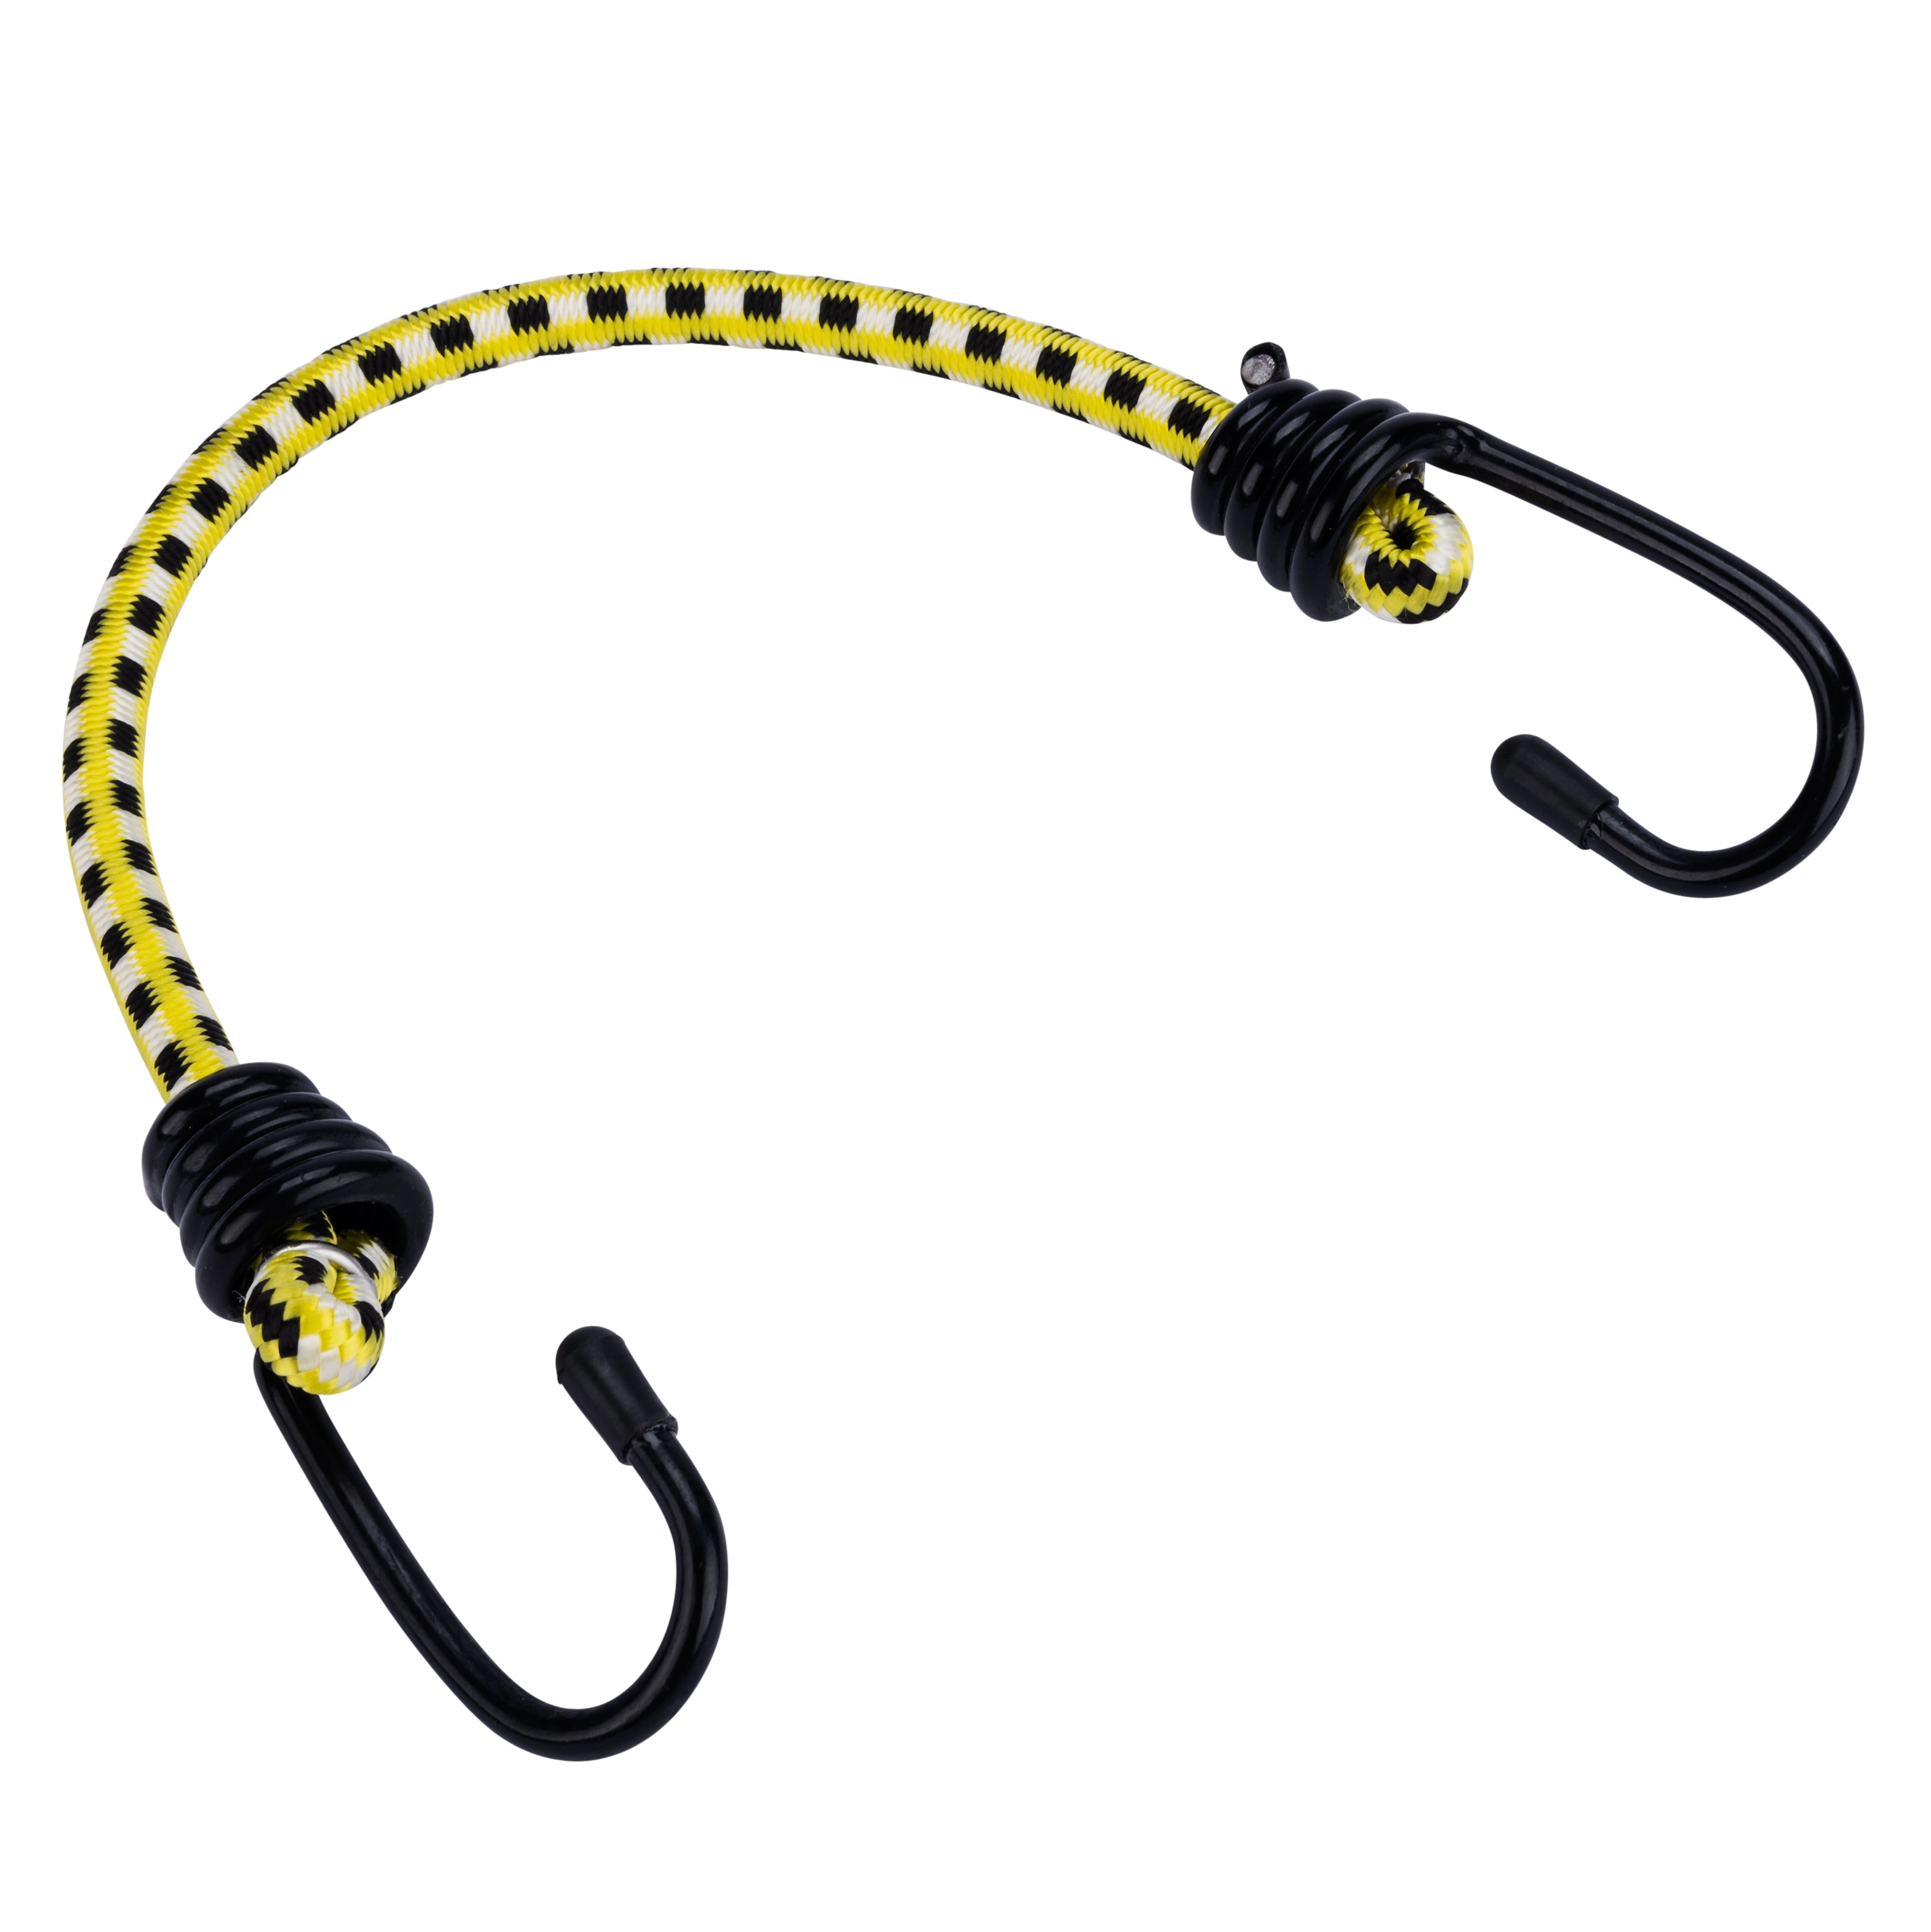 13" Vinyl Coated Bungee Cord variant image view